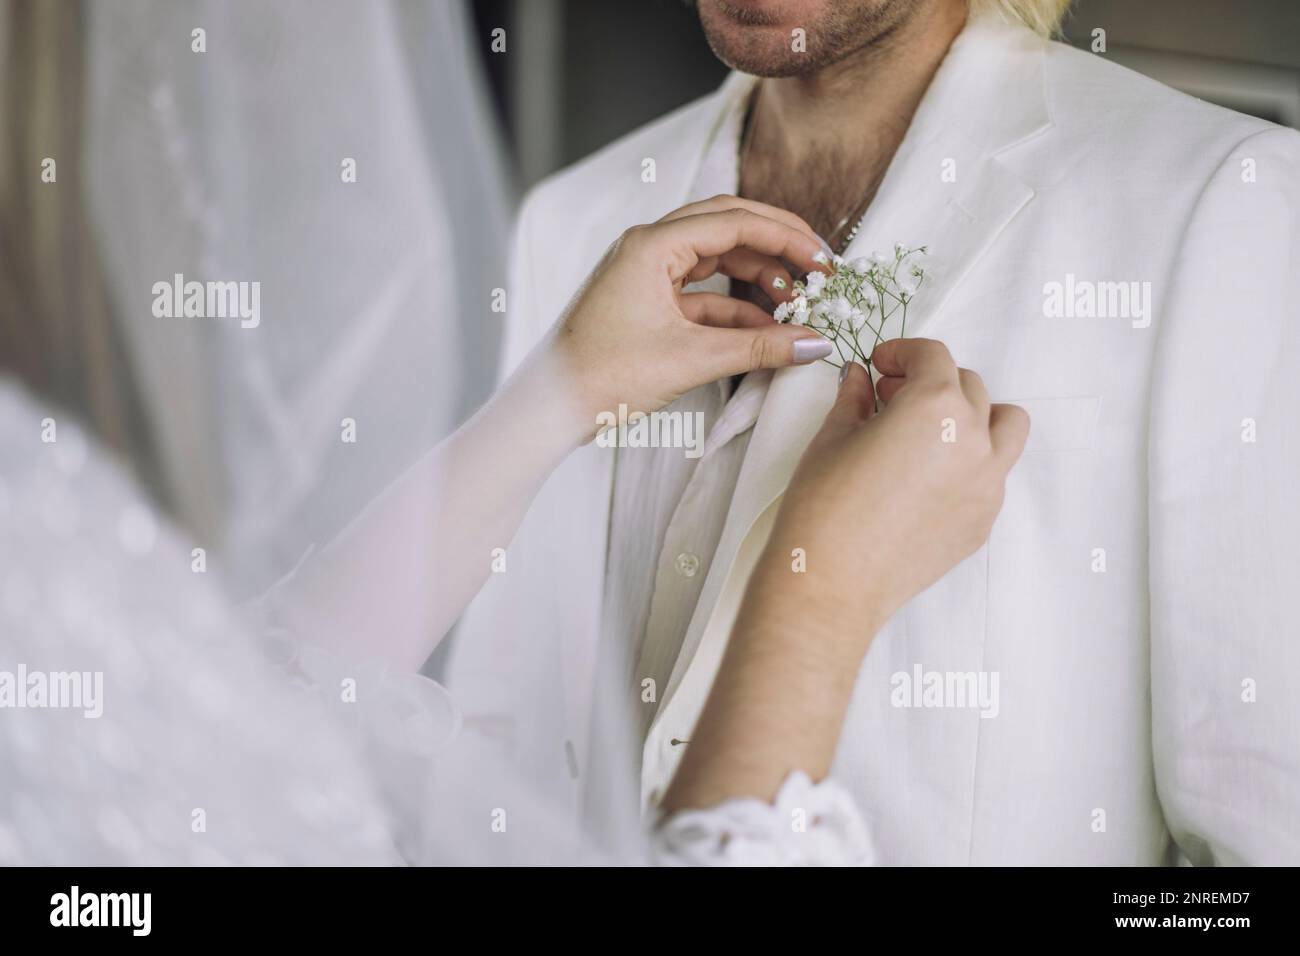 Midsection of bride adjusting boutonniere in groom's pocket on wedding Stock Photo